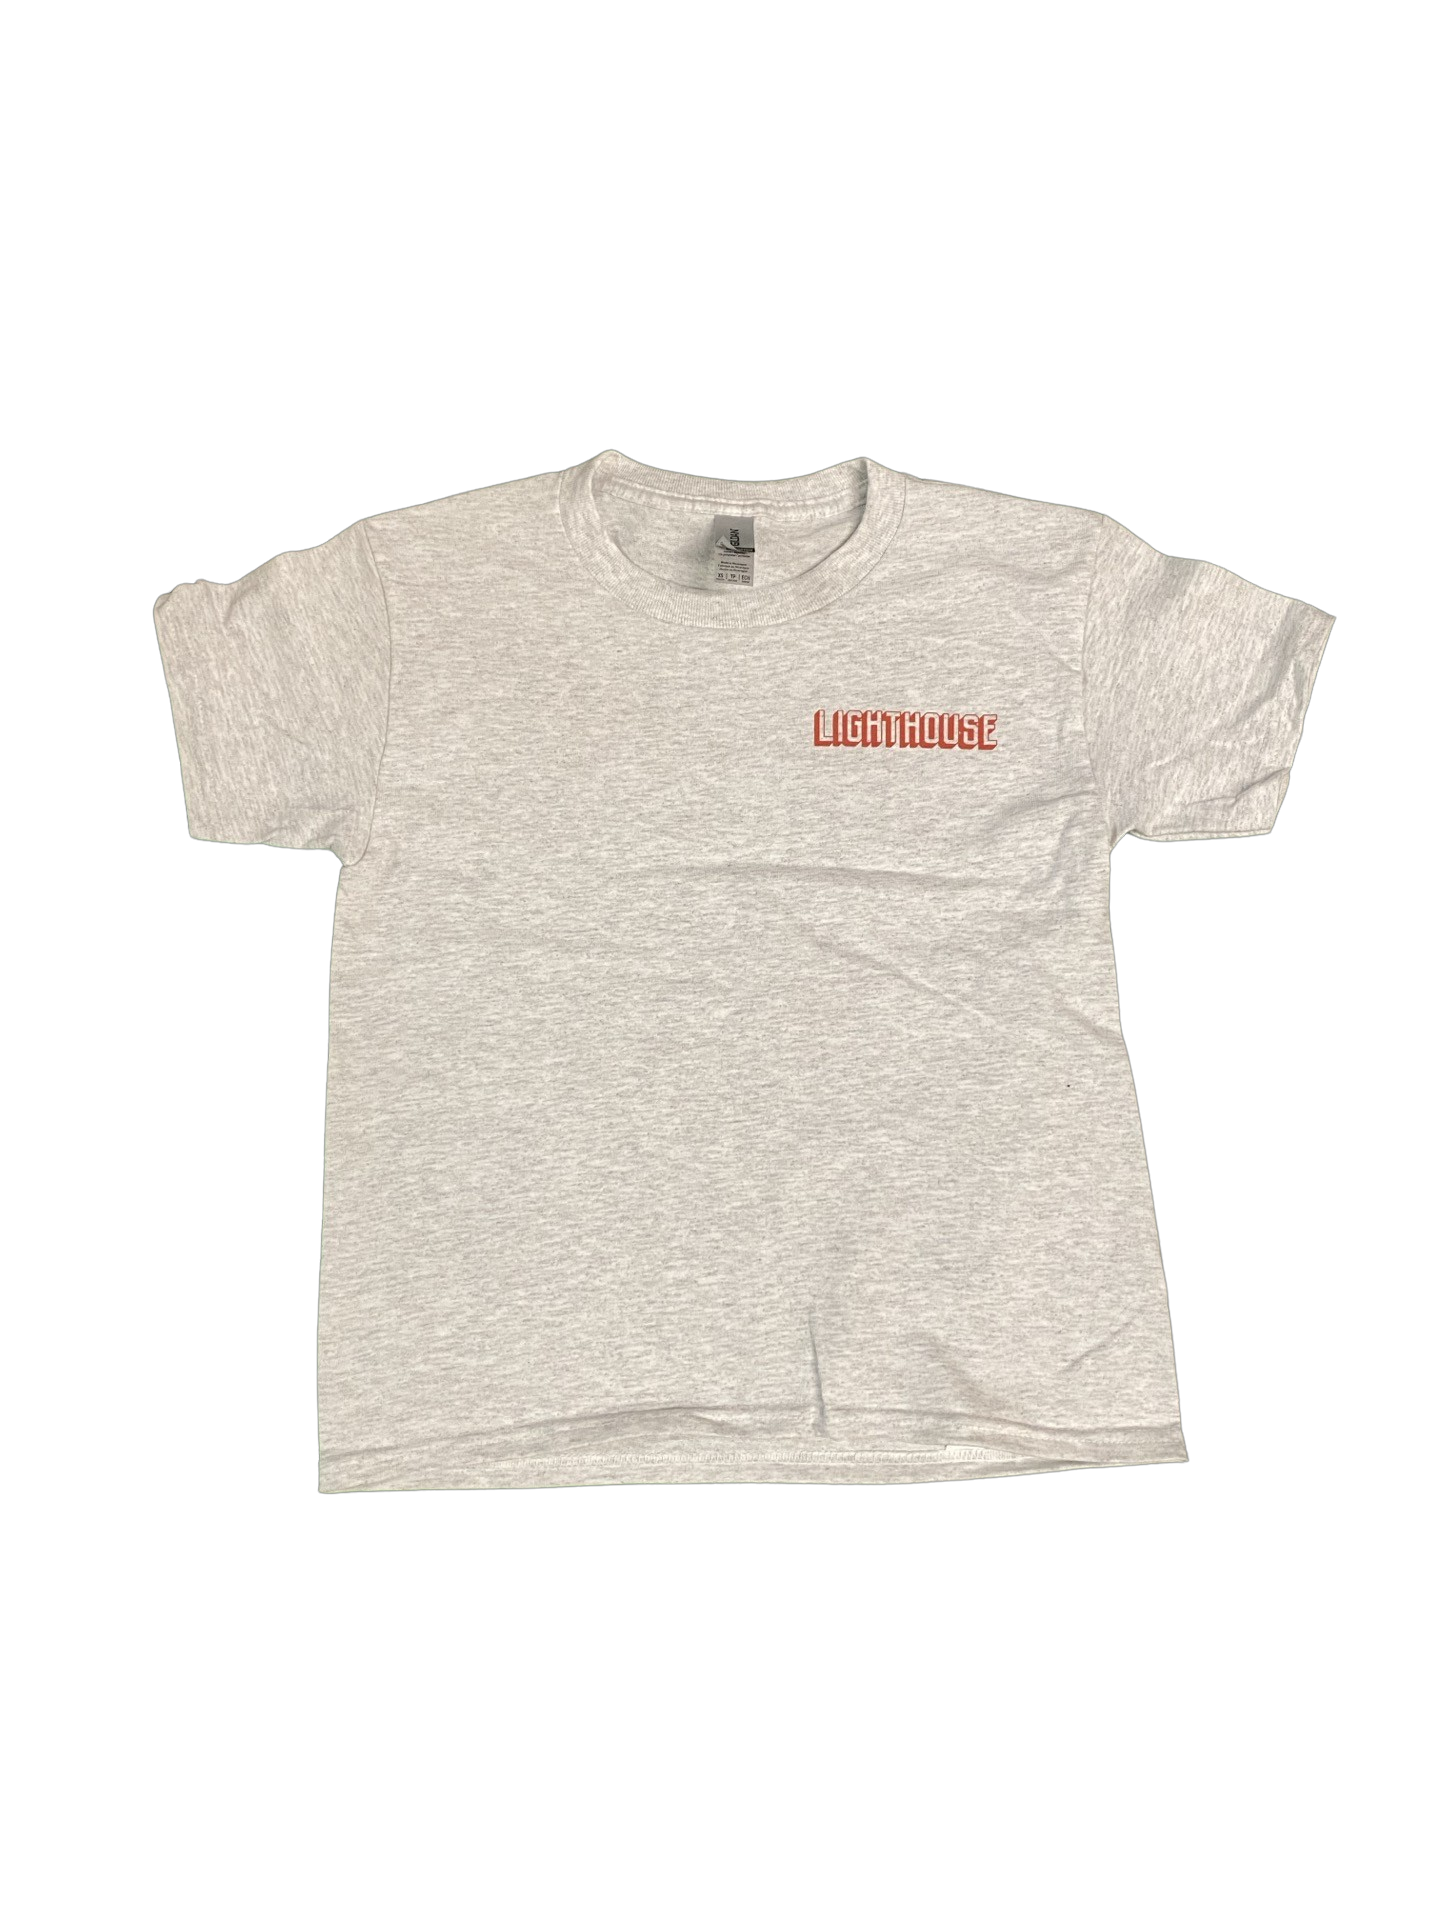 Lighthouse Store Front Youth T Shirt